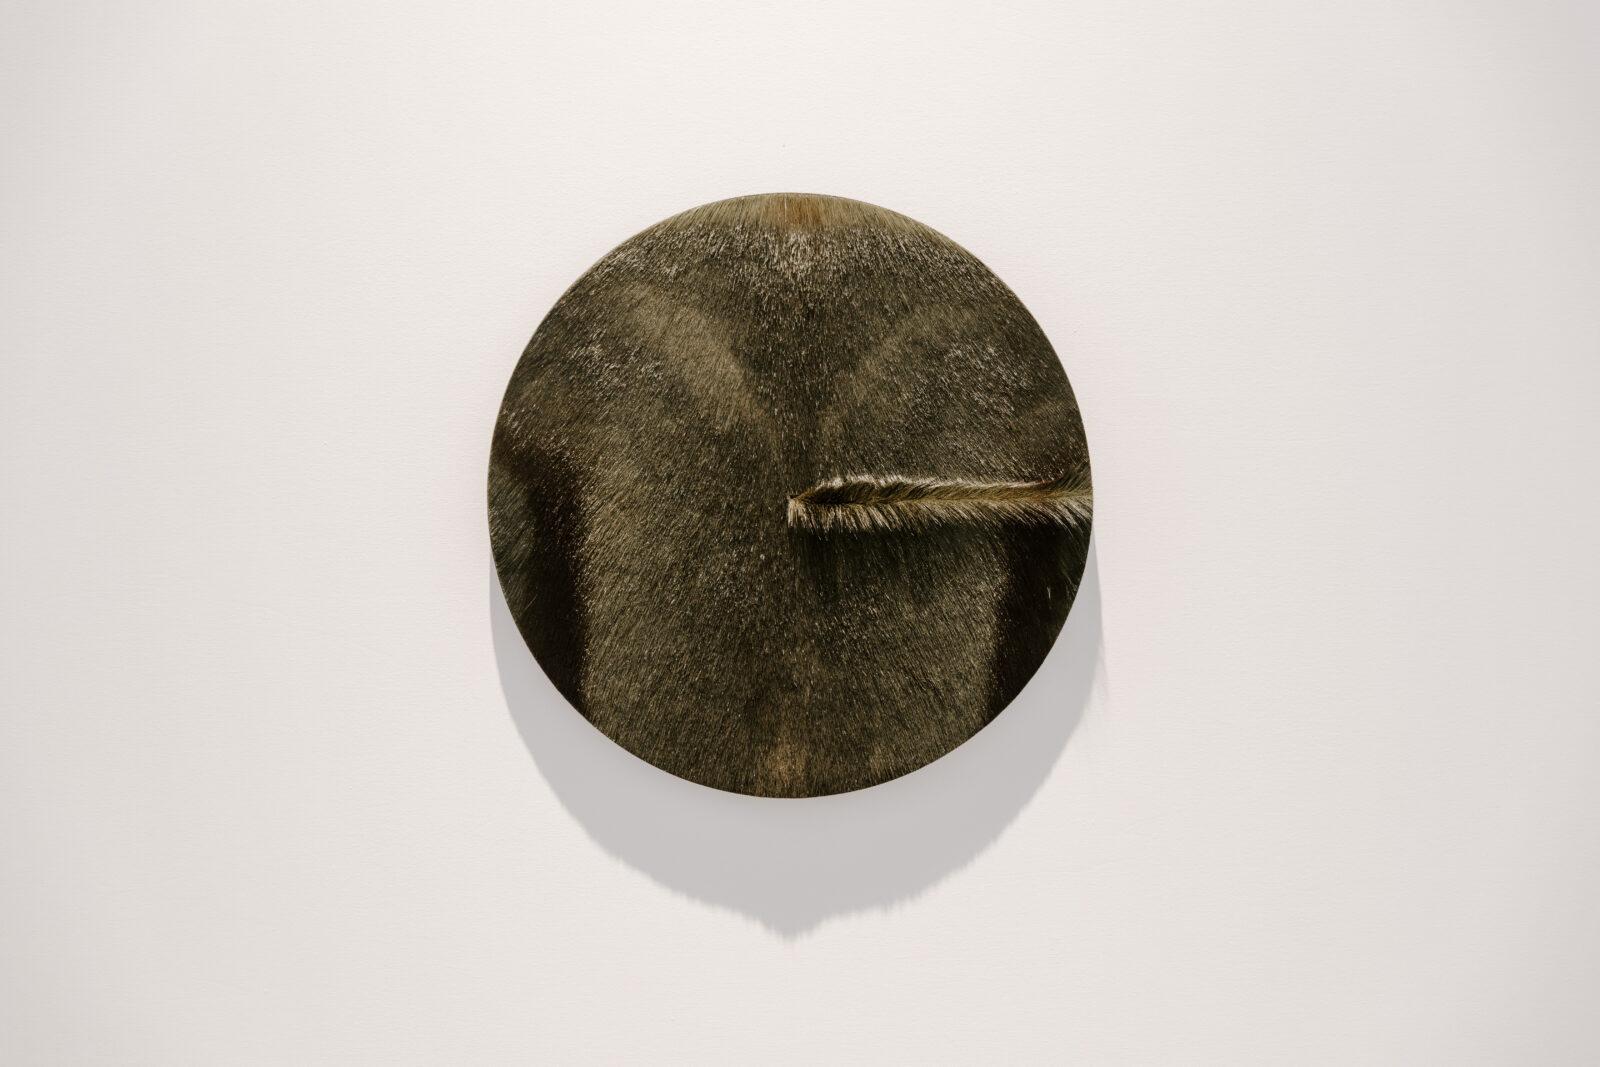 Lore Langendries, Please Do Touch, Wandobject, Springbokhuid, Hout, 40 cm diameter